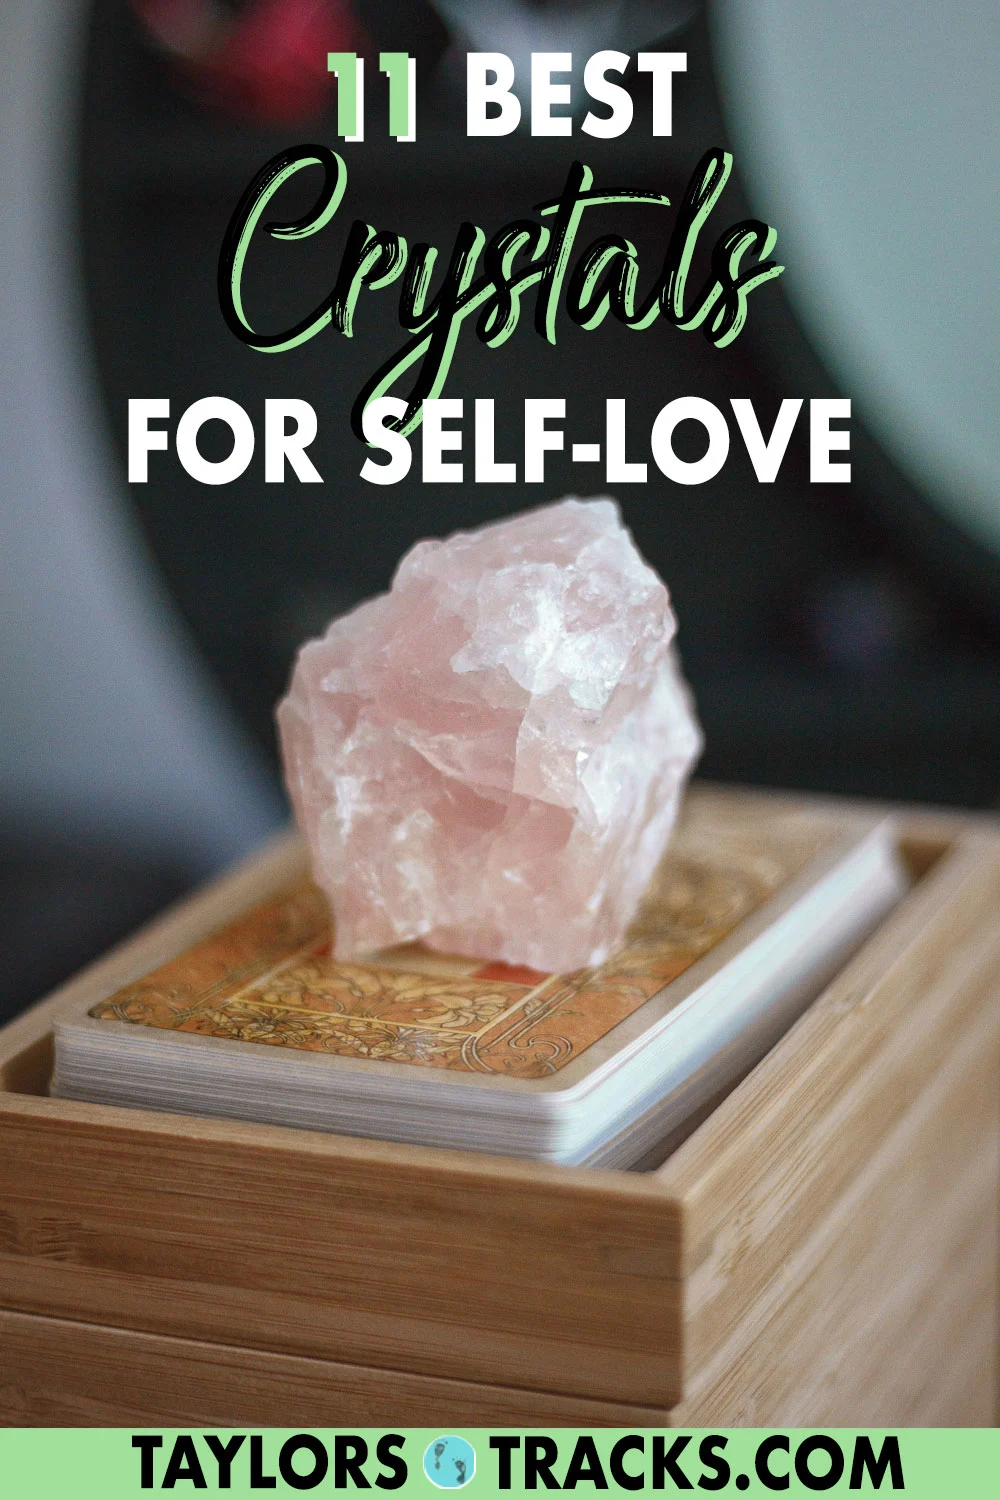 Crystals for self-love are powerful and beautiful, plus they have many more benefits that include confidence, self-worth, self-esteem and more. Click to find out which crystals you can add to your self-care routine and feel more self-love!